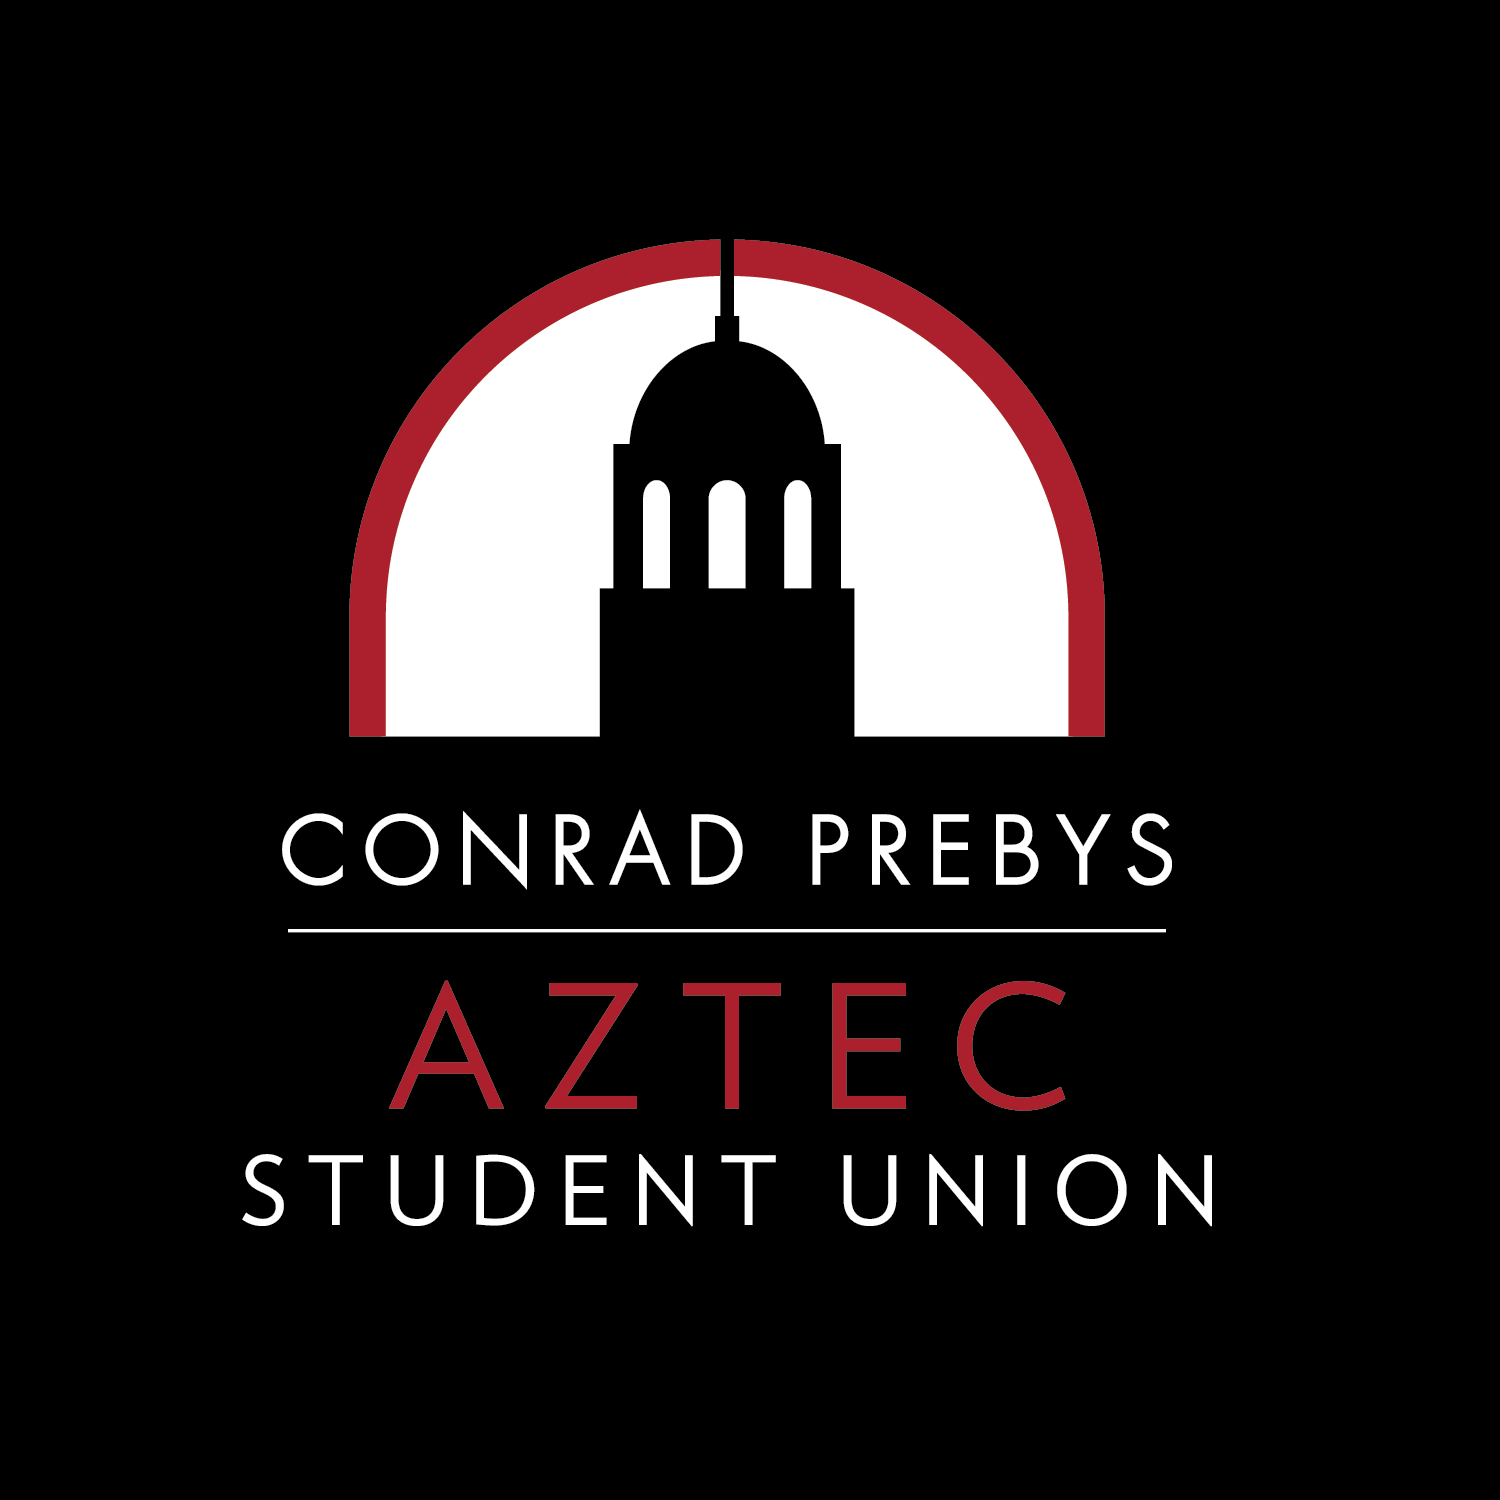 black background with vector artwork of sdsu conrad prebys student union with white and uppercase red words that says "Conrad Prebys Aztec Student Union"